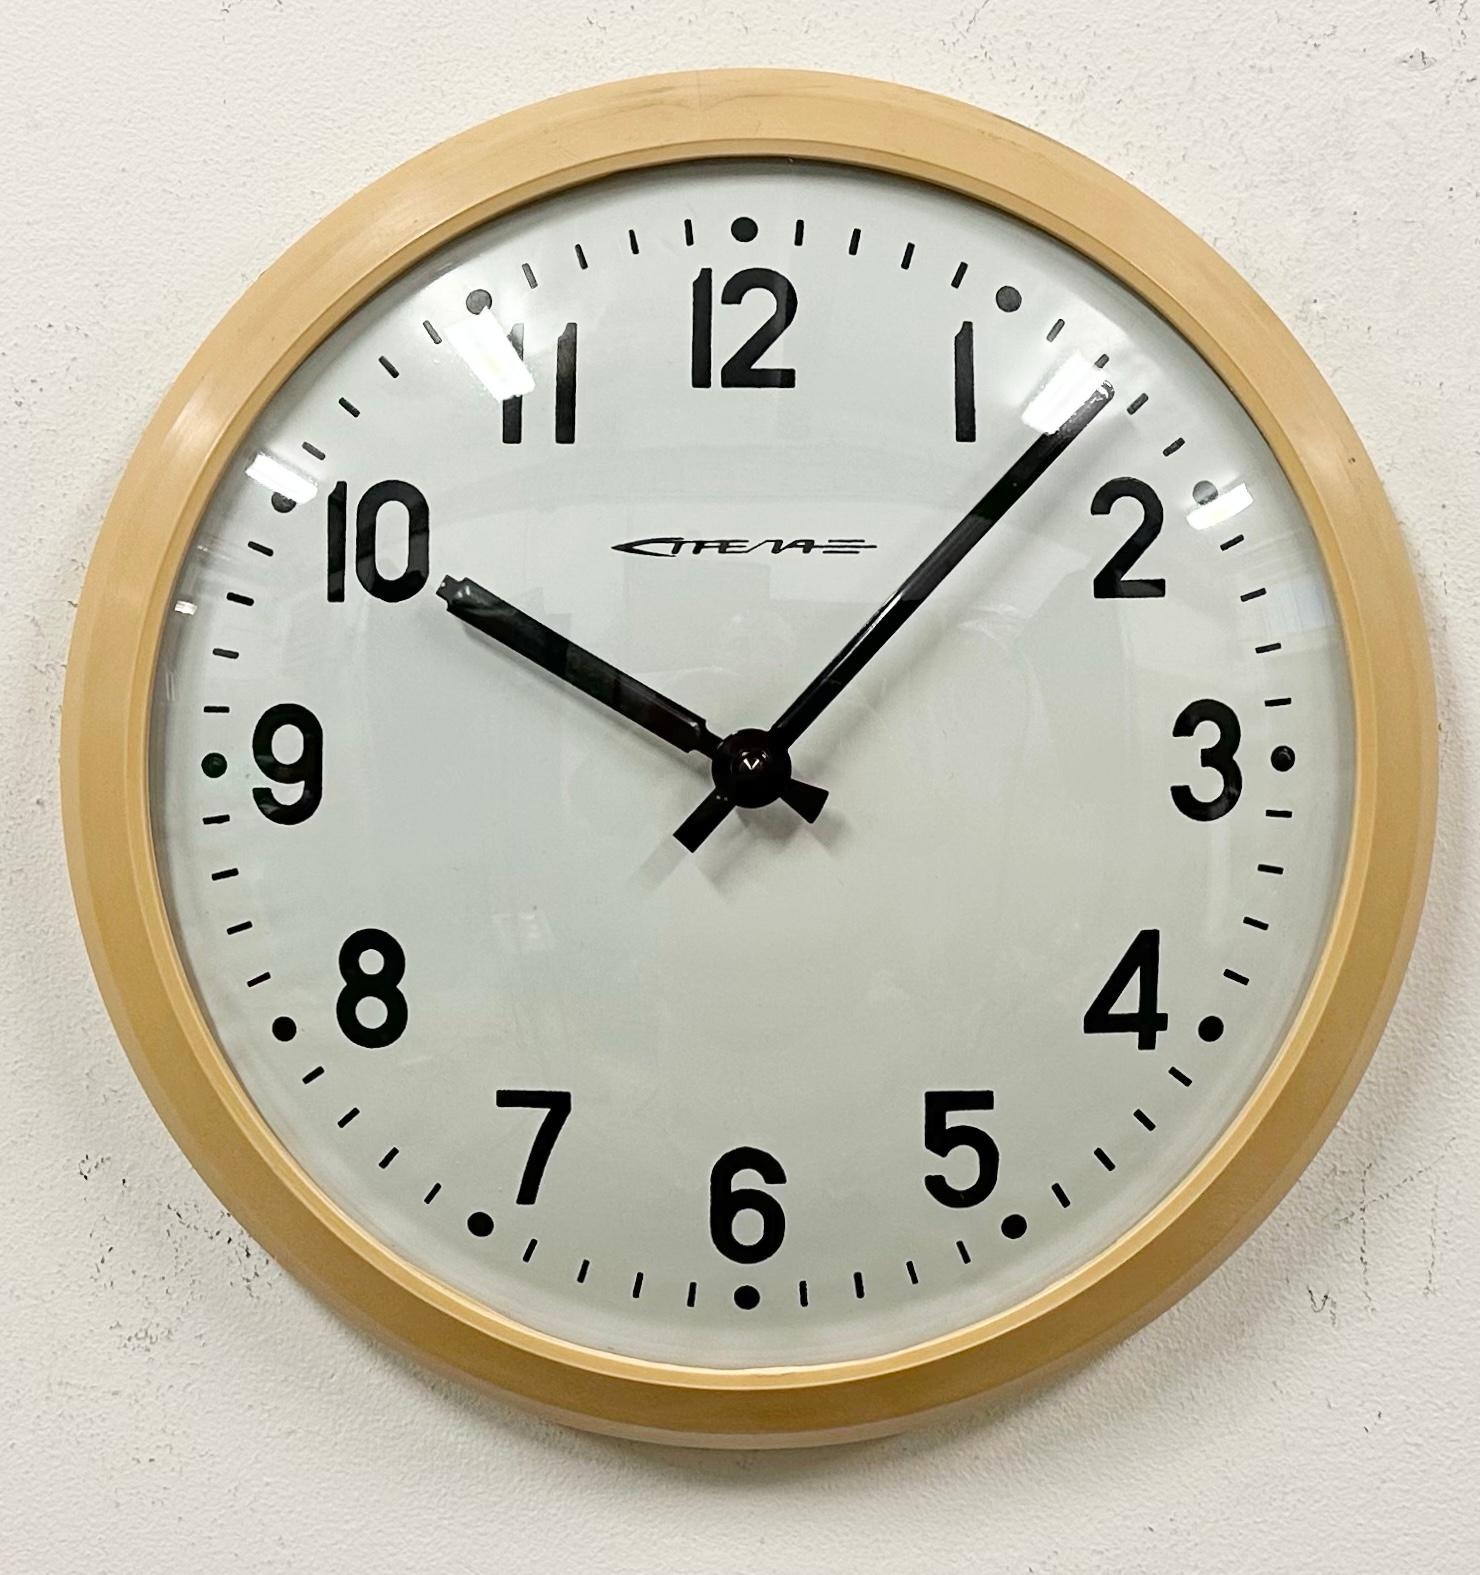 This wall clock was produced by Strela in former Soviet Union during the 1960s .It features a beige bakelite frame, an iron dial and a convex clear glass cover. The piece has been converted into a battery-powered clockwork and requires only one